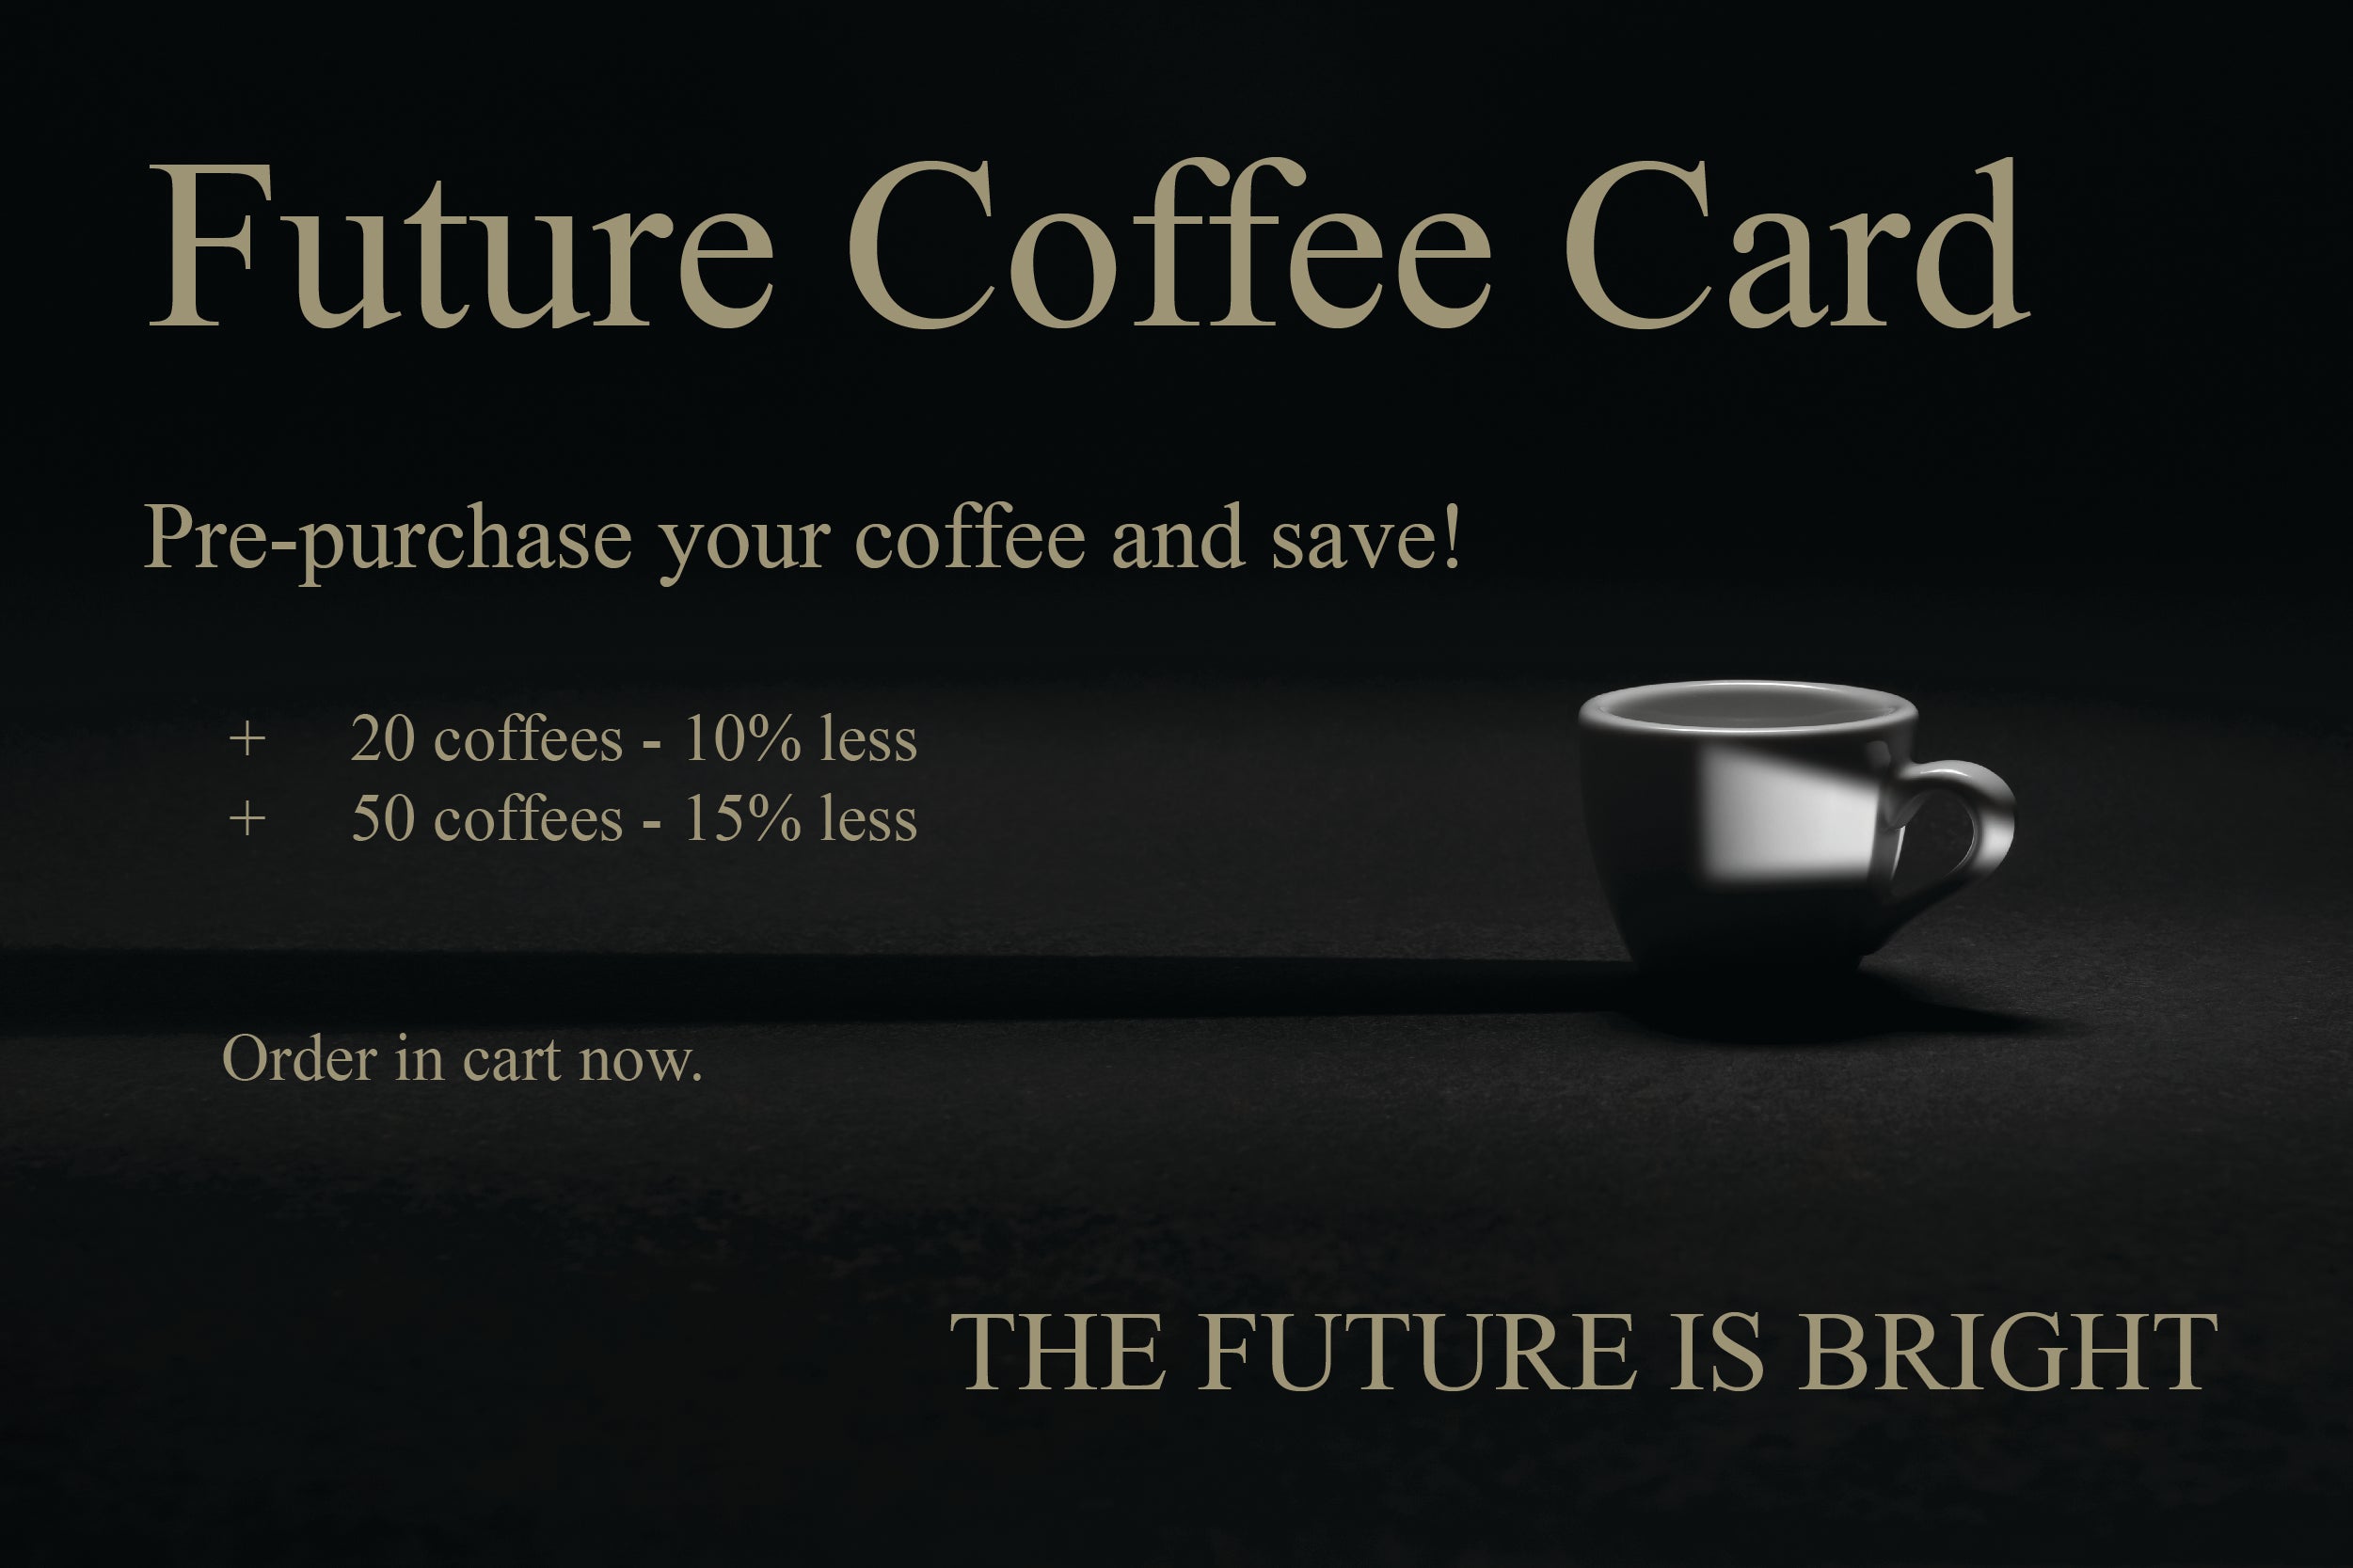 Future Coffee Cards - White Coffees